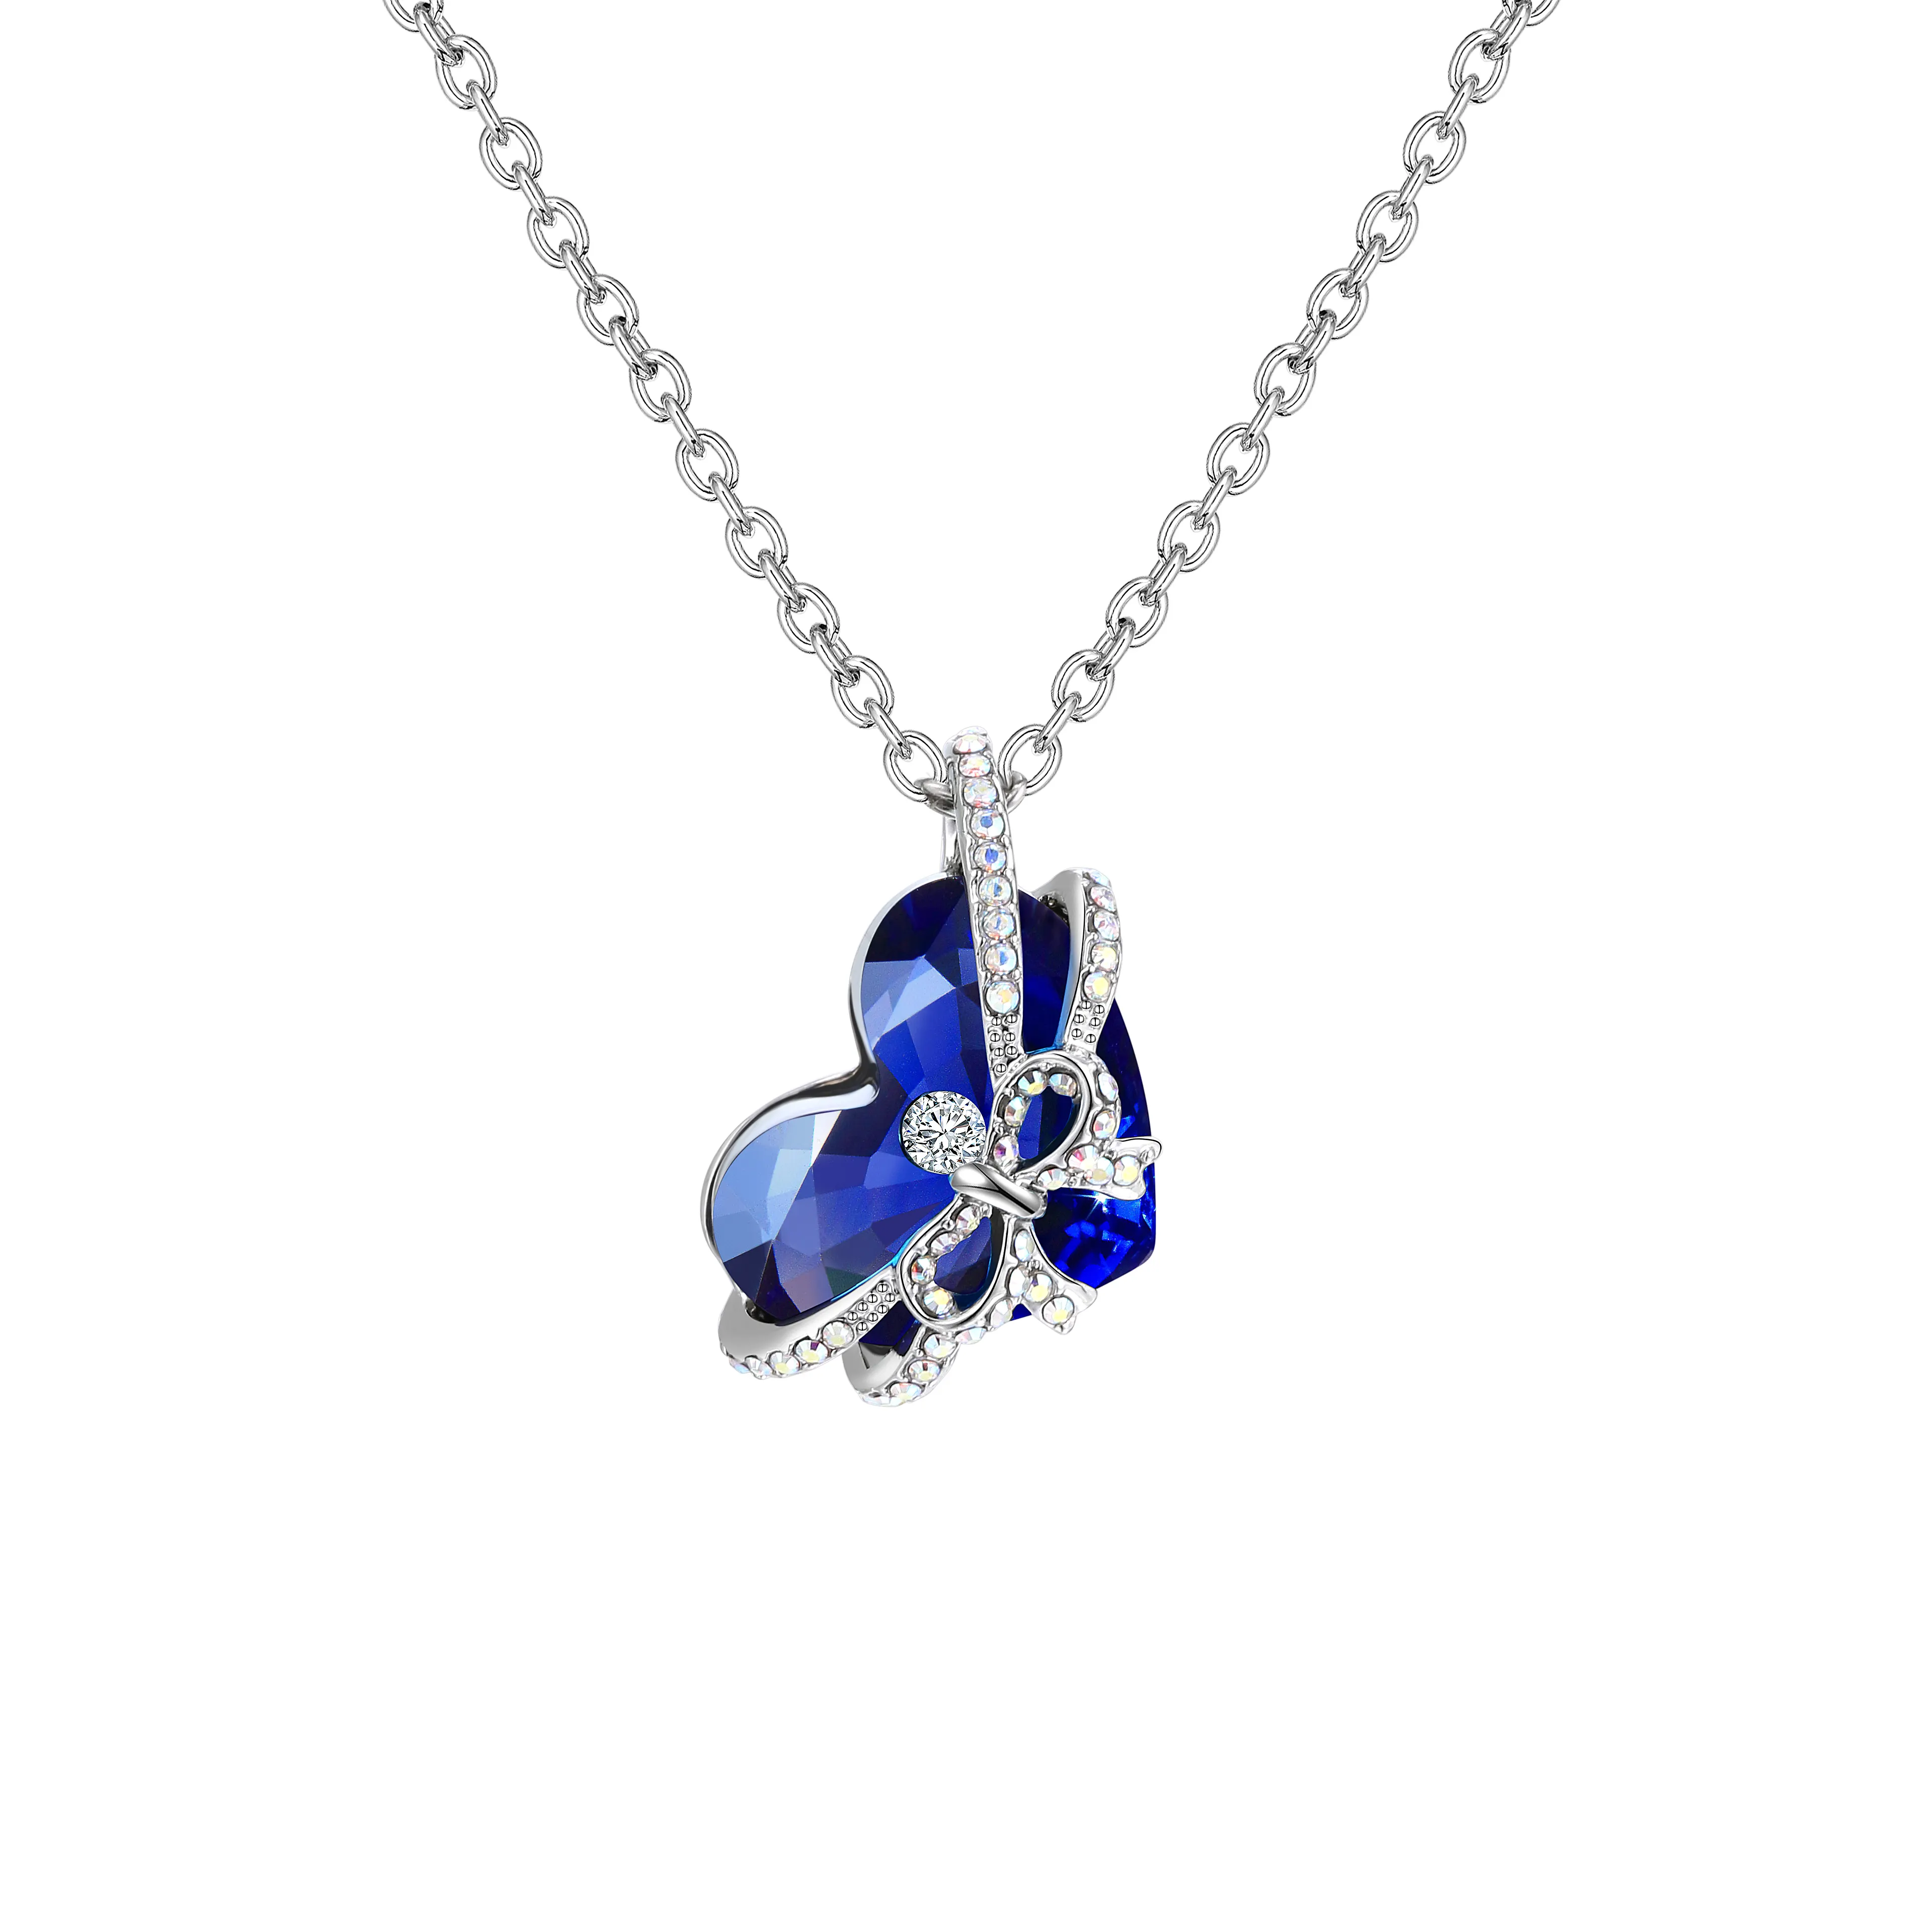 2022 New Arrival Luxury Blue Austrian Crystal Heart Pendant Necklaces High Quality Trendy Women Jewelry Fashion Accessories